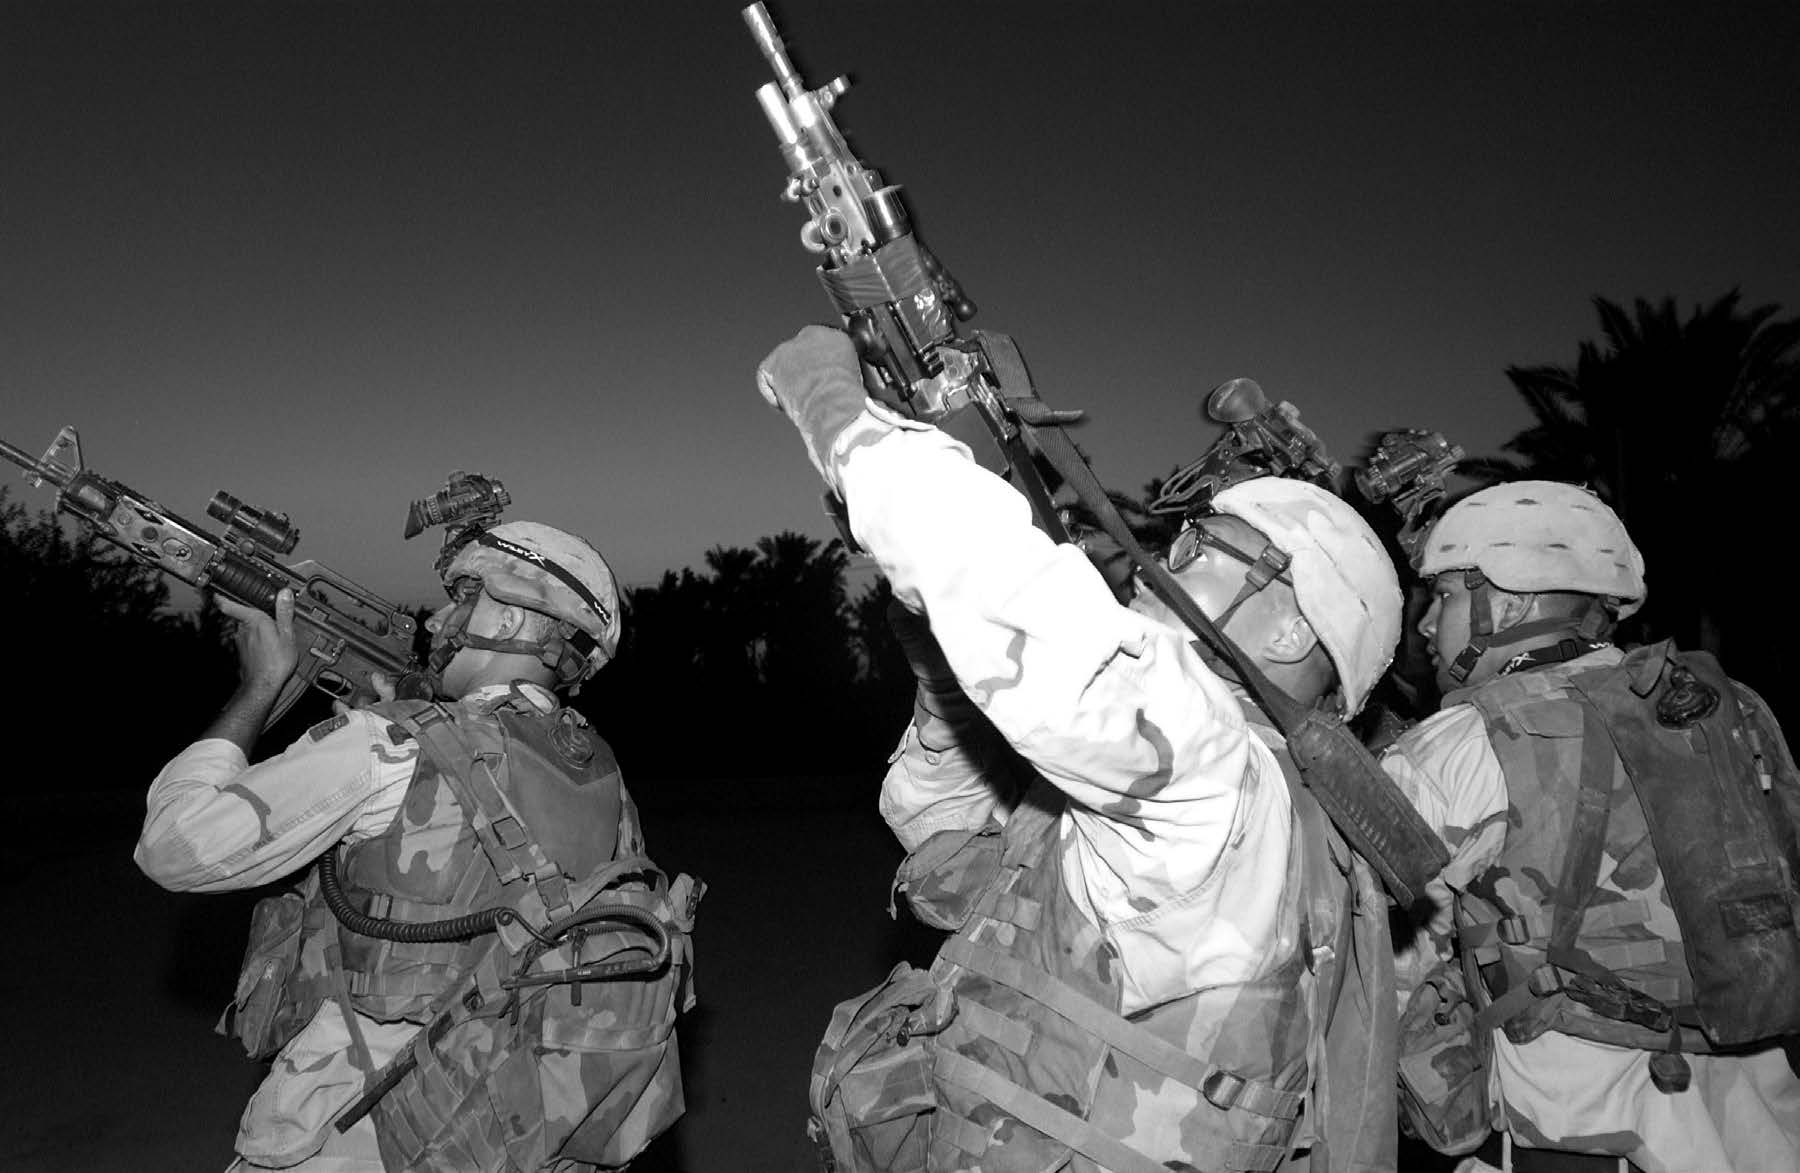 U.S. Army soldiers from the 579th Engineering Battalion secure a rooftop during a search and seizure mission in August 2004. Courtesy of DoD.